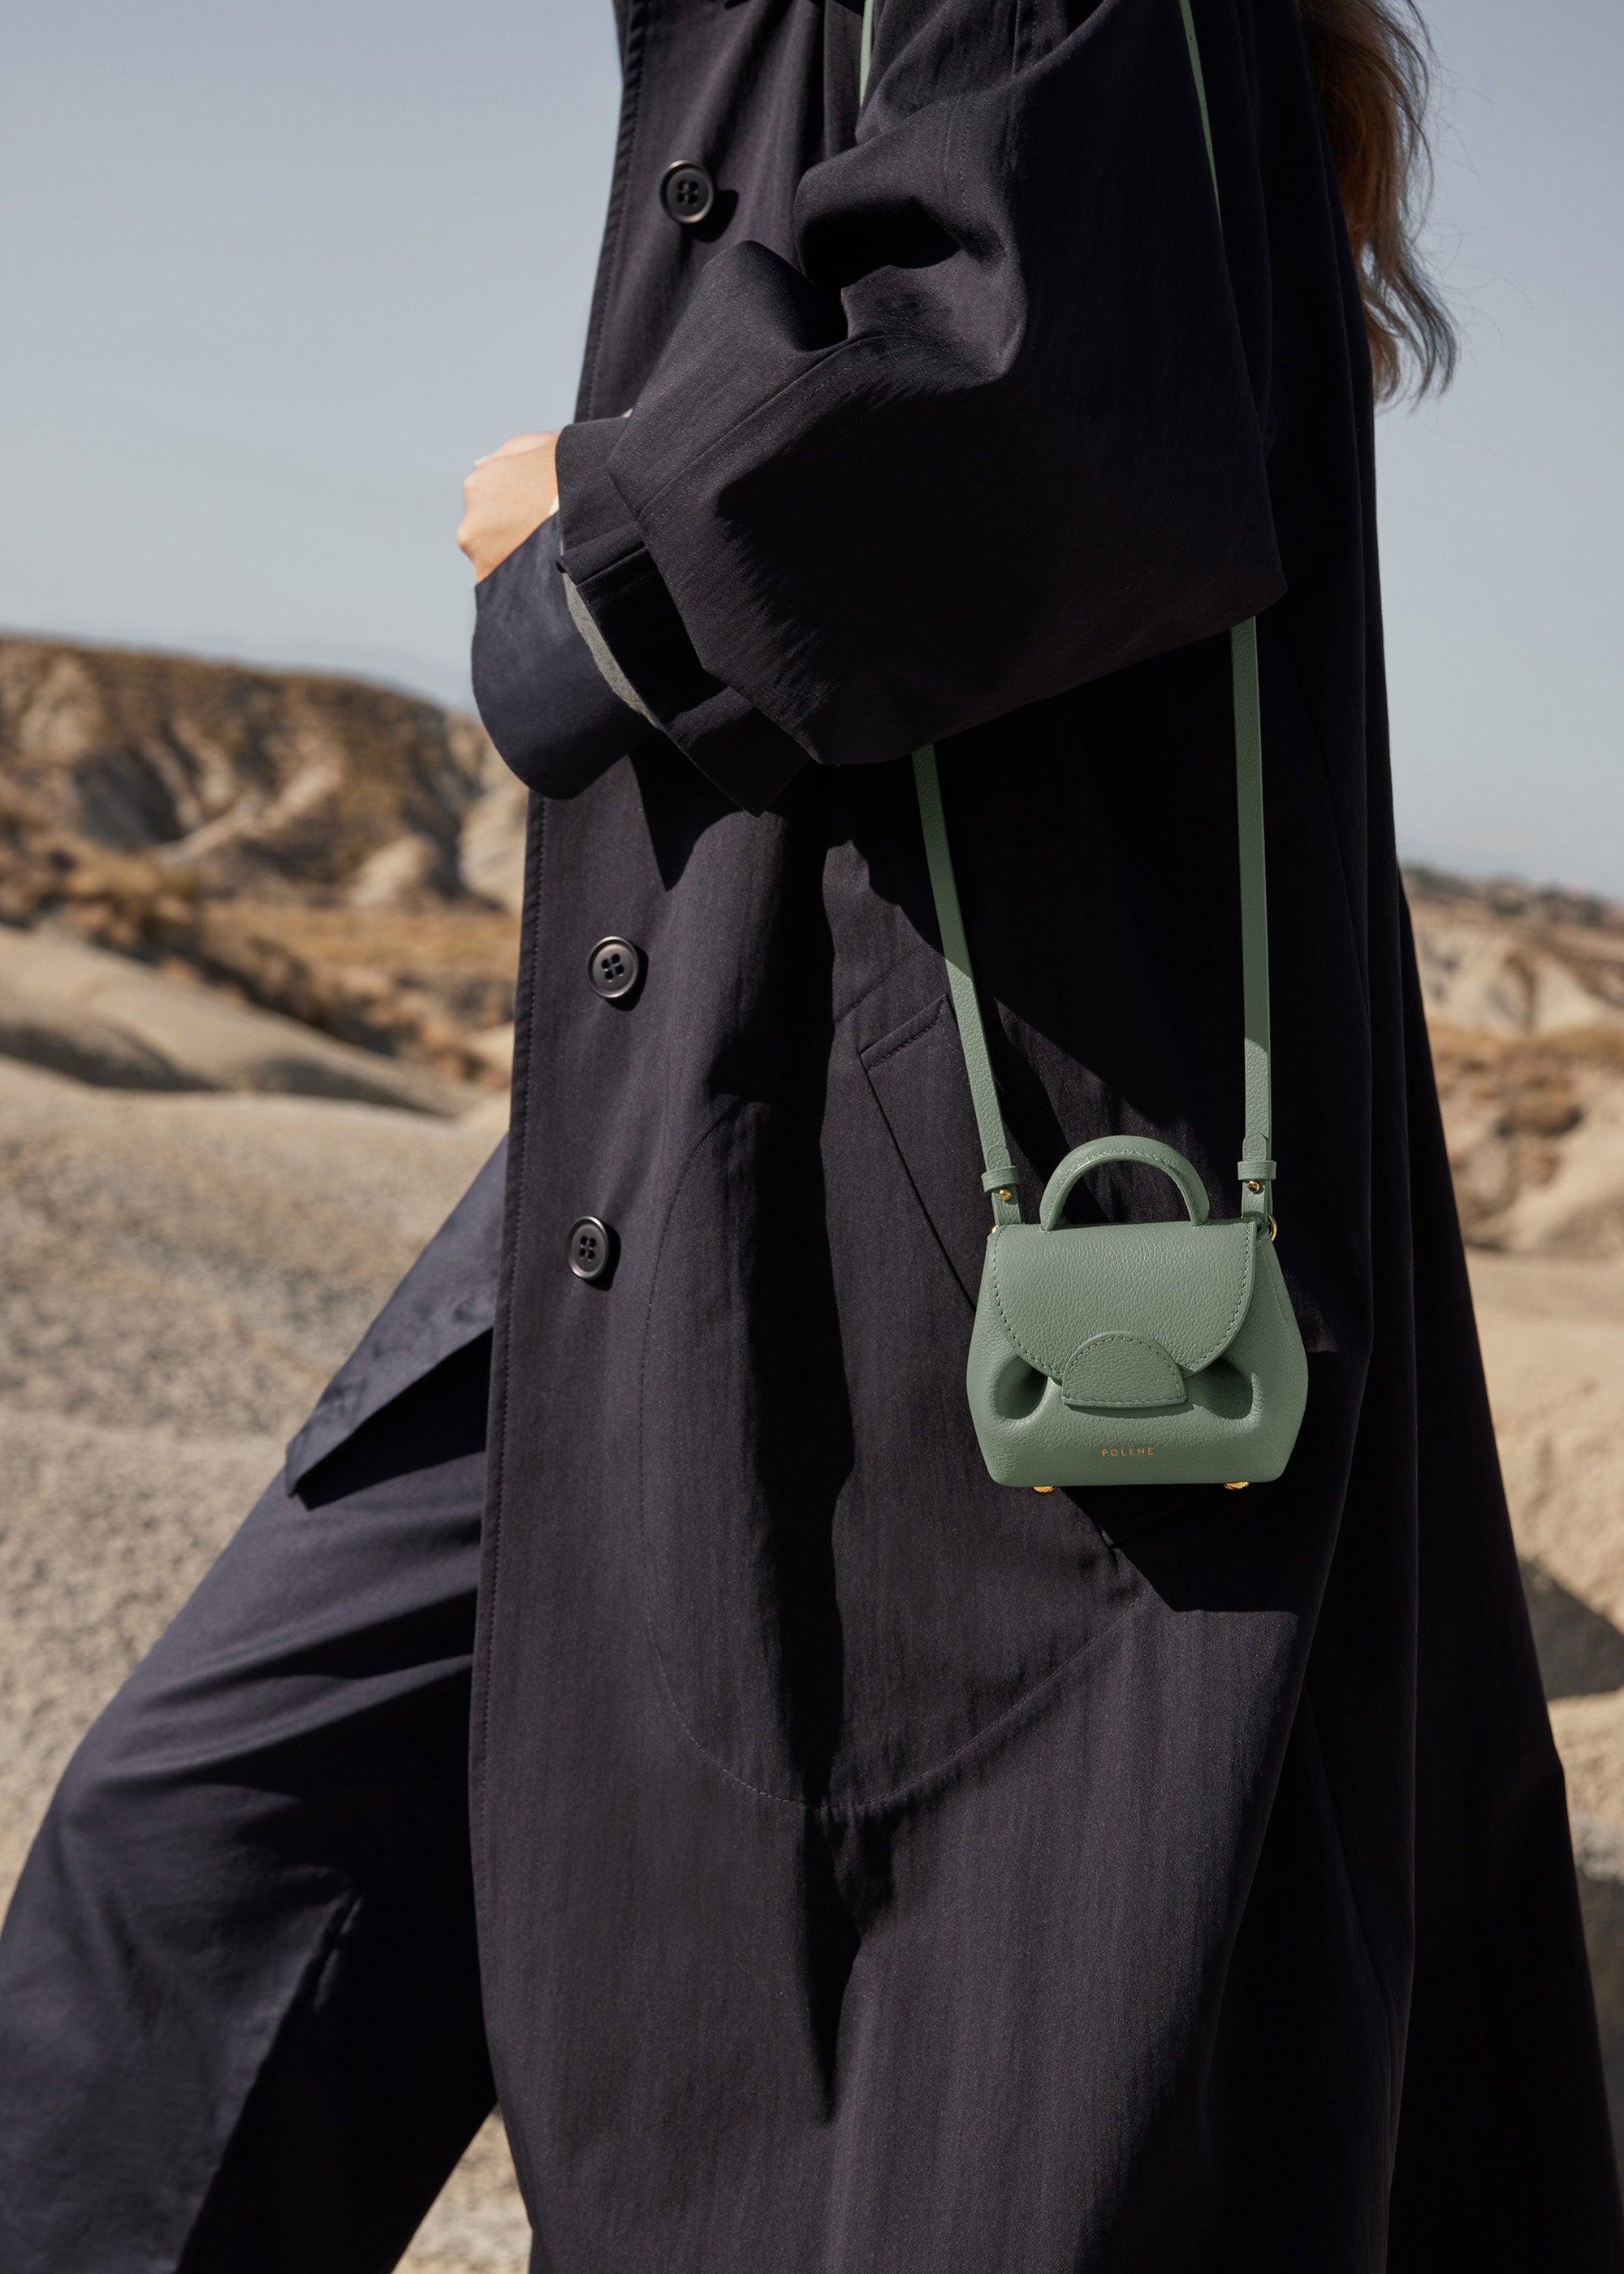 Polene, Bags, Polne Number One Micro Bag In Sage Textured Leather